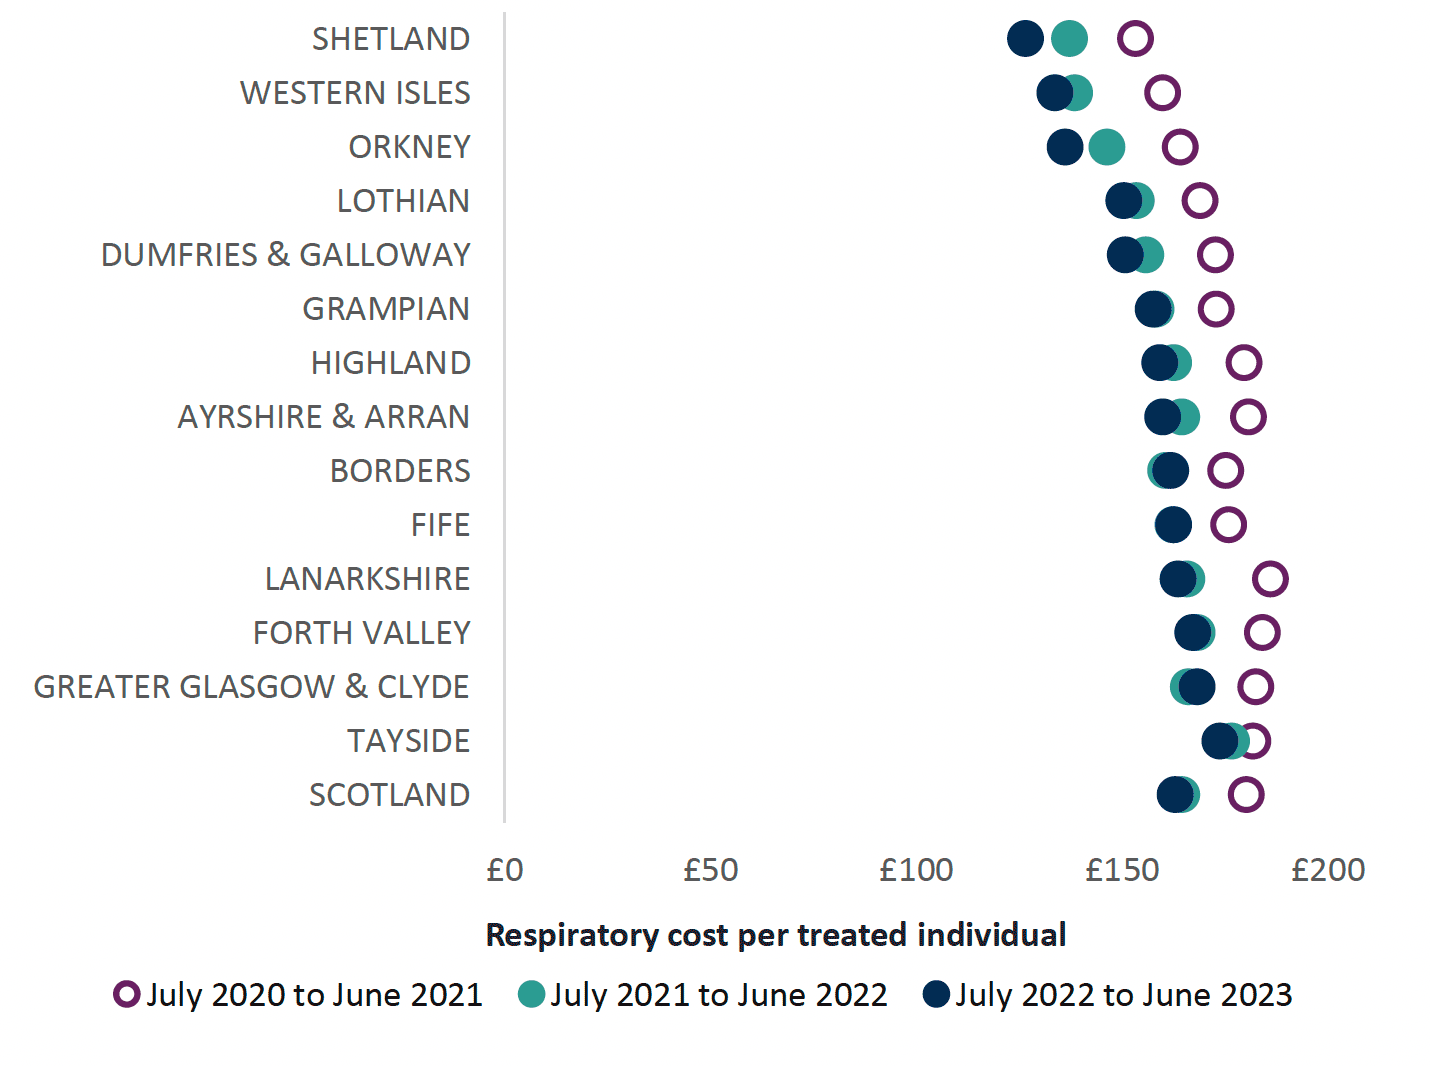 Chart showing variance in respiratory costs per treated patient across all health boards and Scotland from 2020 to 2023. Overall Scotland trend is decreasing